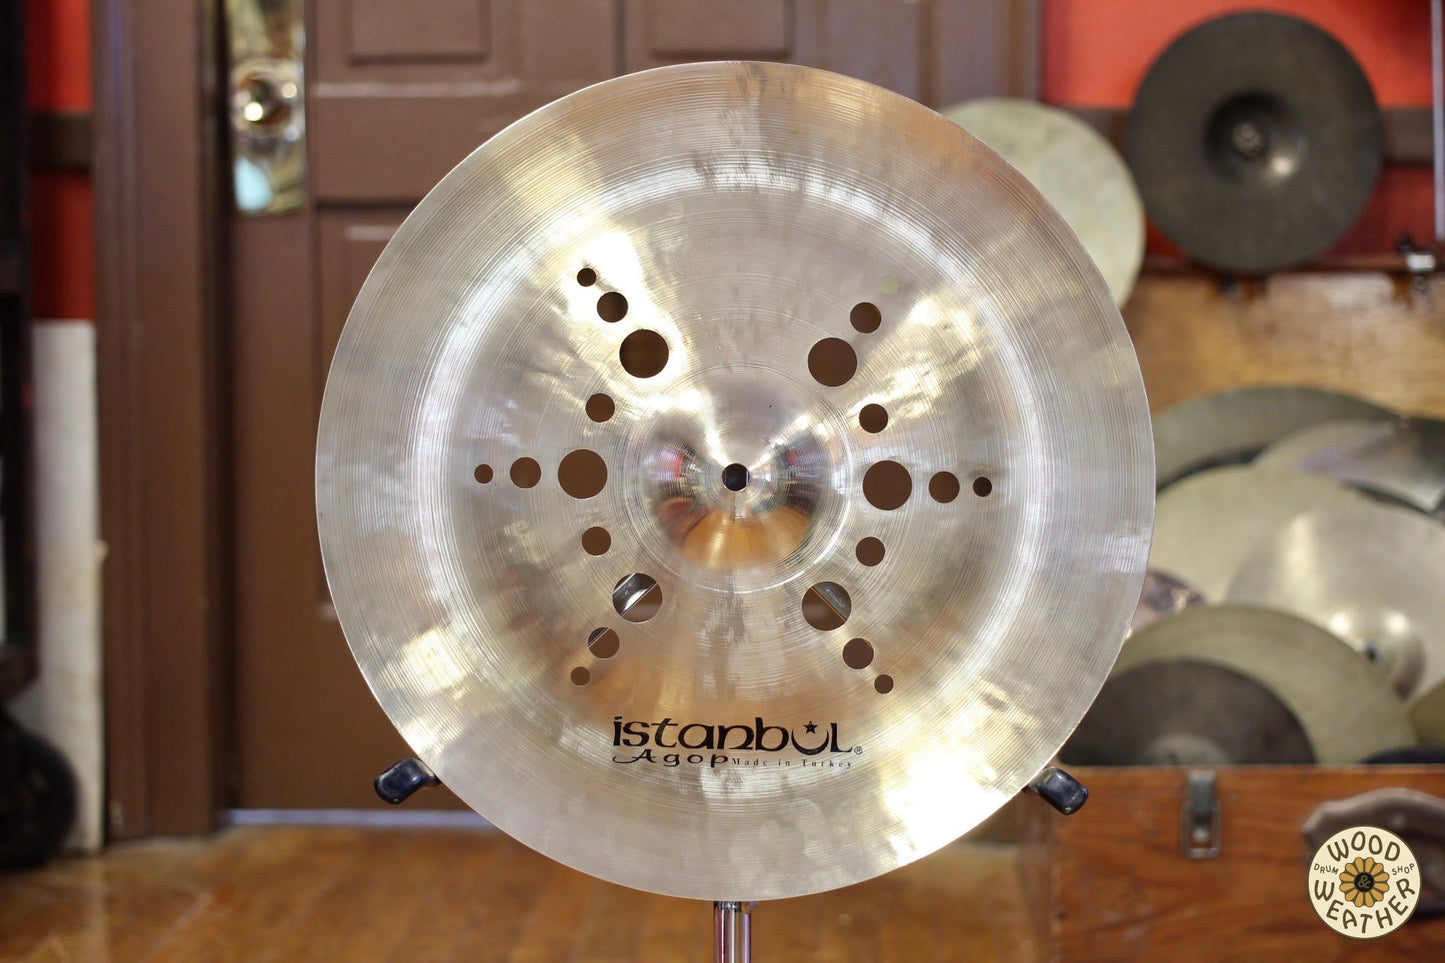 USED Istanbul Agop 16" Xist ION China Cymbal 795g